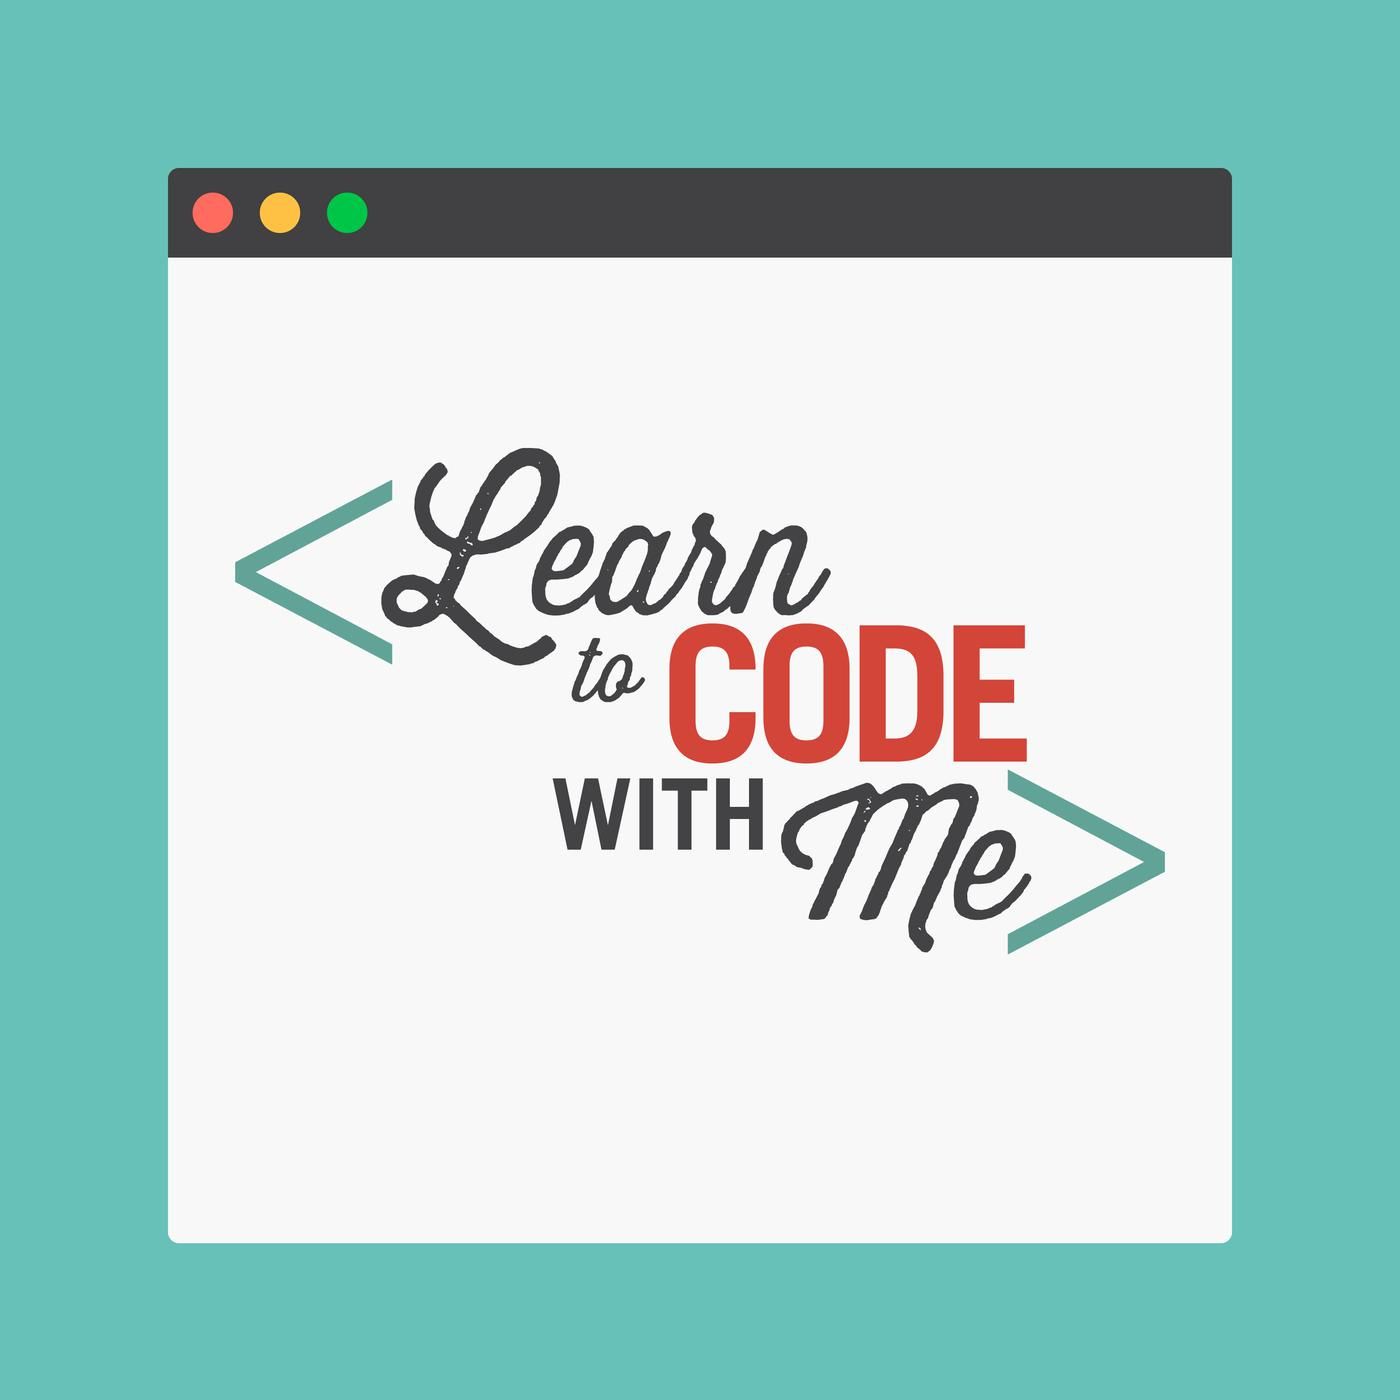 learn-to-code-with-me-laurence-bradford-nLOTazR6ph5-nVxCdhSp1Wf.1400x1400